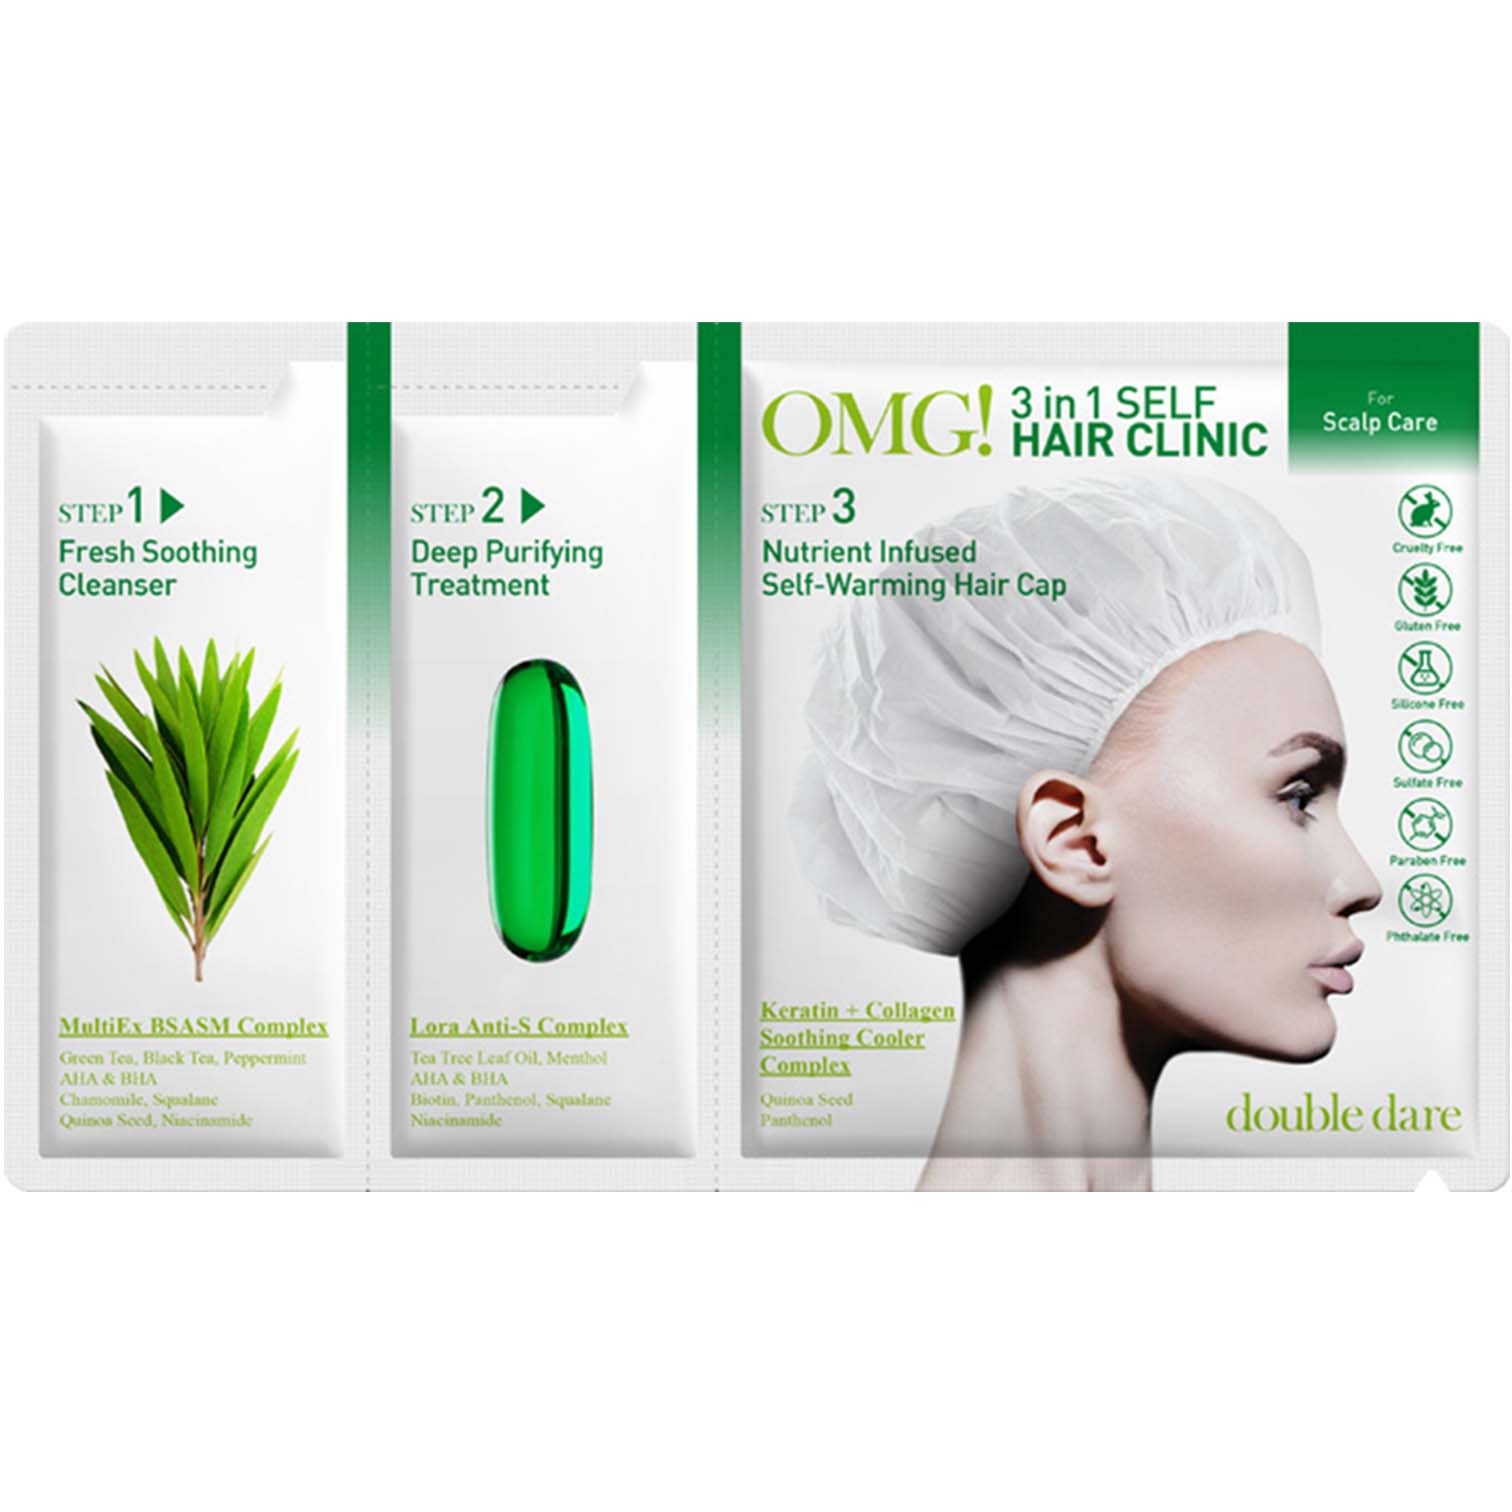 OMG! Double Dare 3In1 Self Hair Clinic Scalp Care